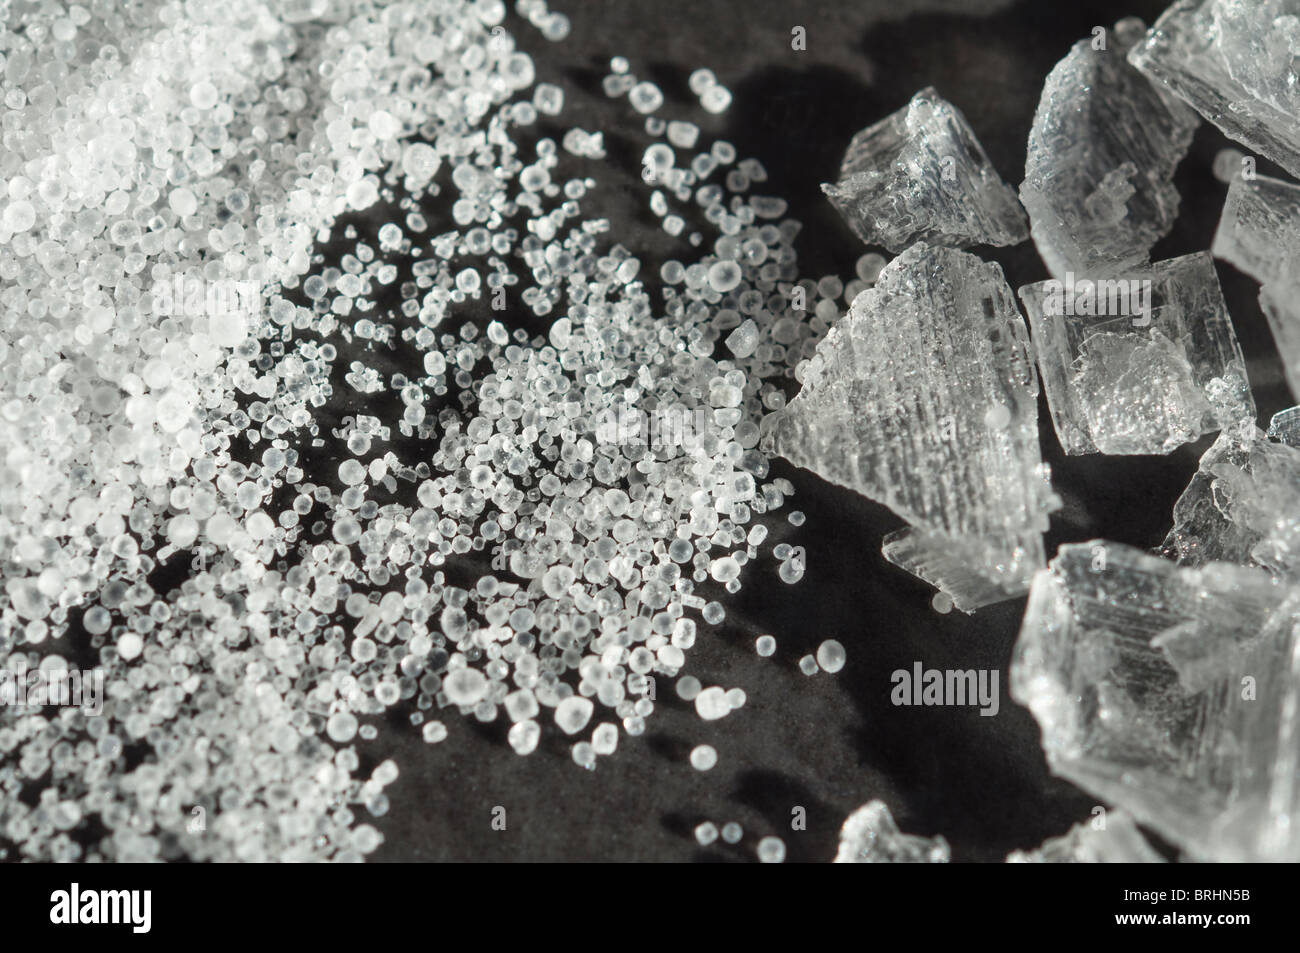 Macro close-up of Table salt rounded grains juxtaposed with crystalized sea salt. Stock Photo